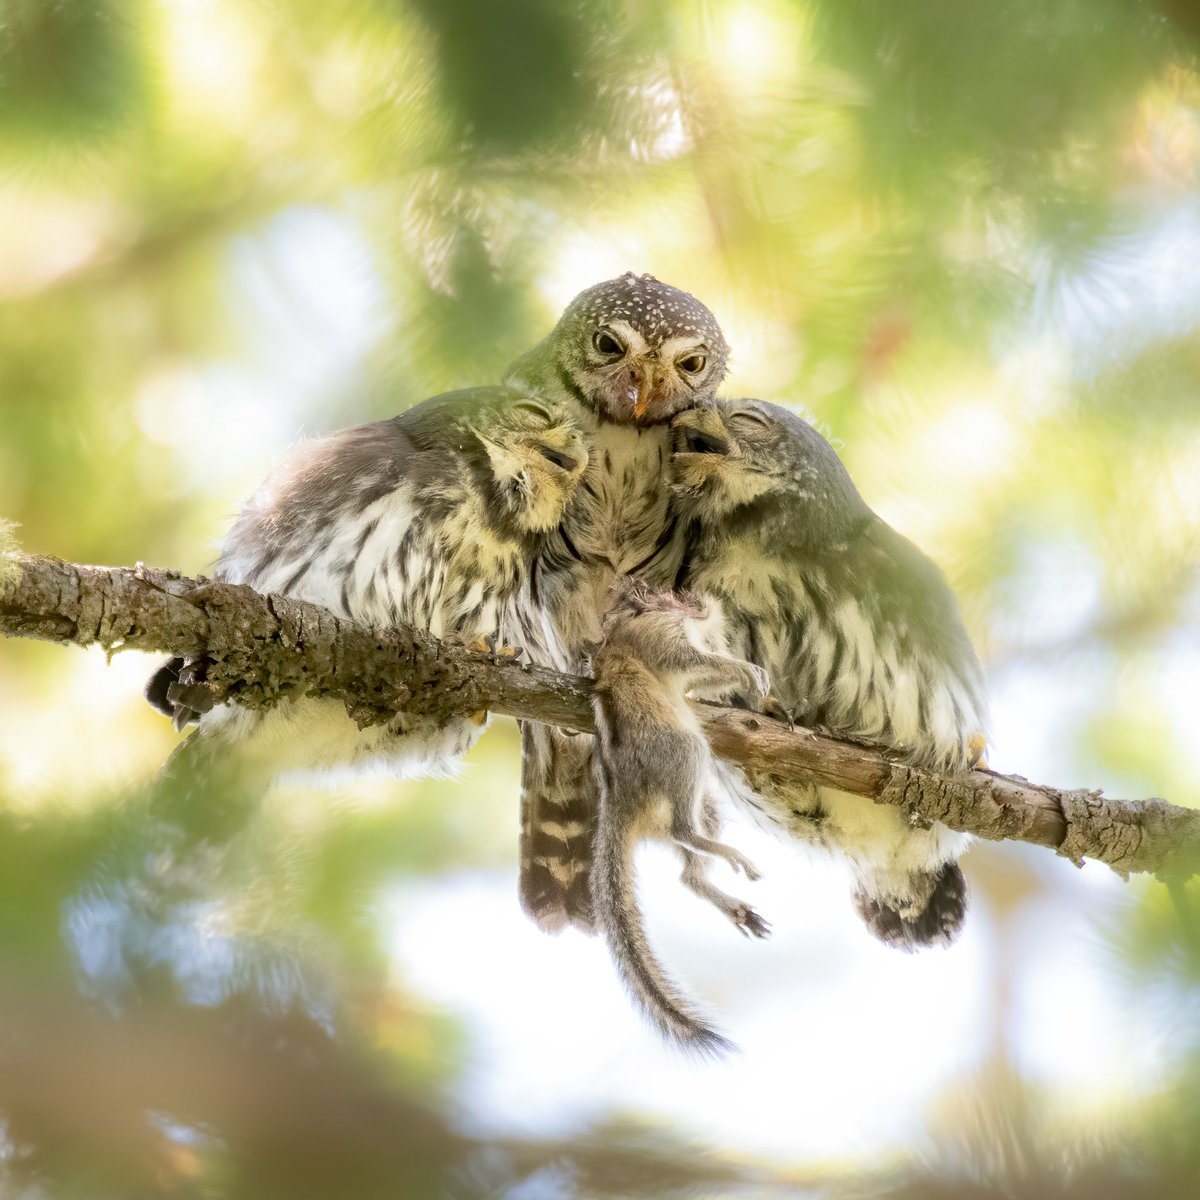 Another owl post! Here is a mama Pygmy owl feeding a chipmunk to two of her kids. The ecstasy on their faces is the purest bliss I’ve seen in nature. #InternationalOwlAwarenessDay #owl #wildlifephotography